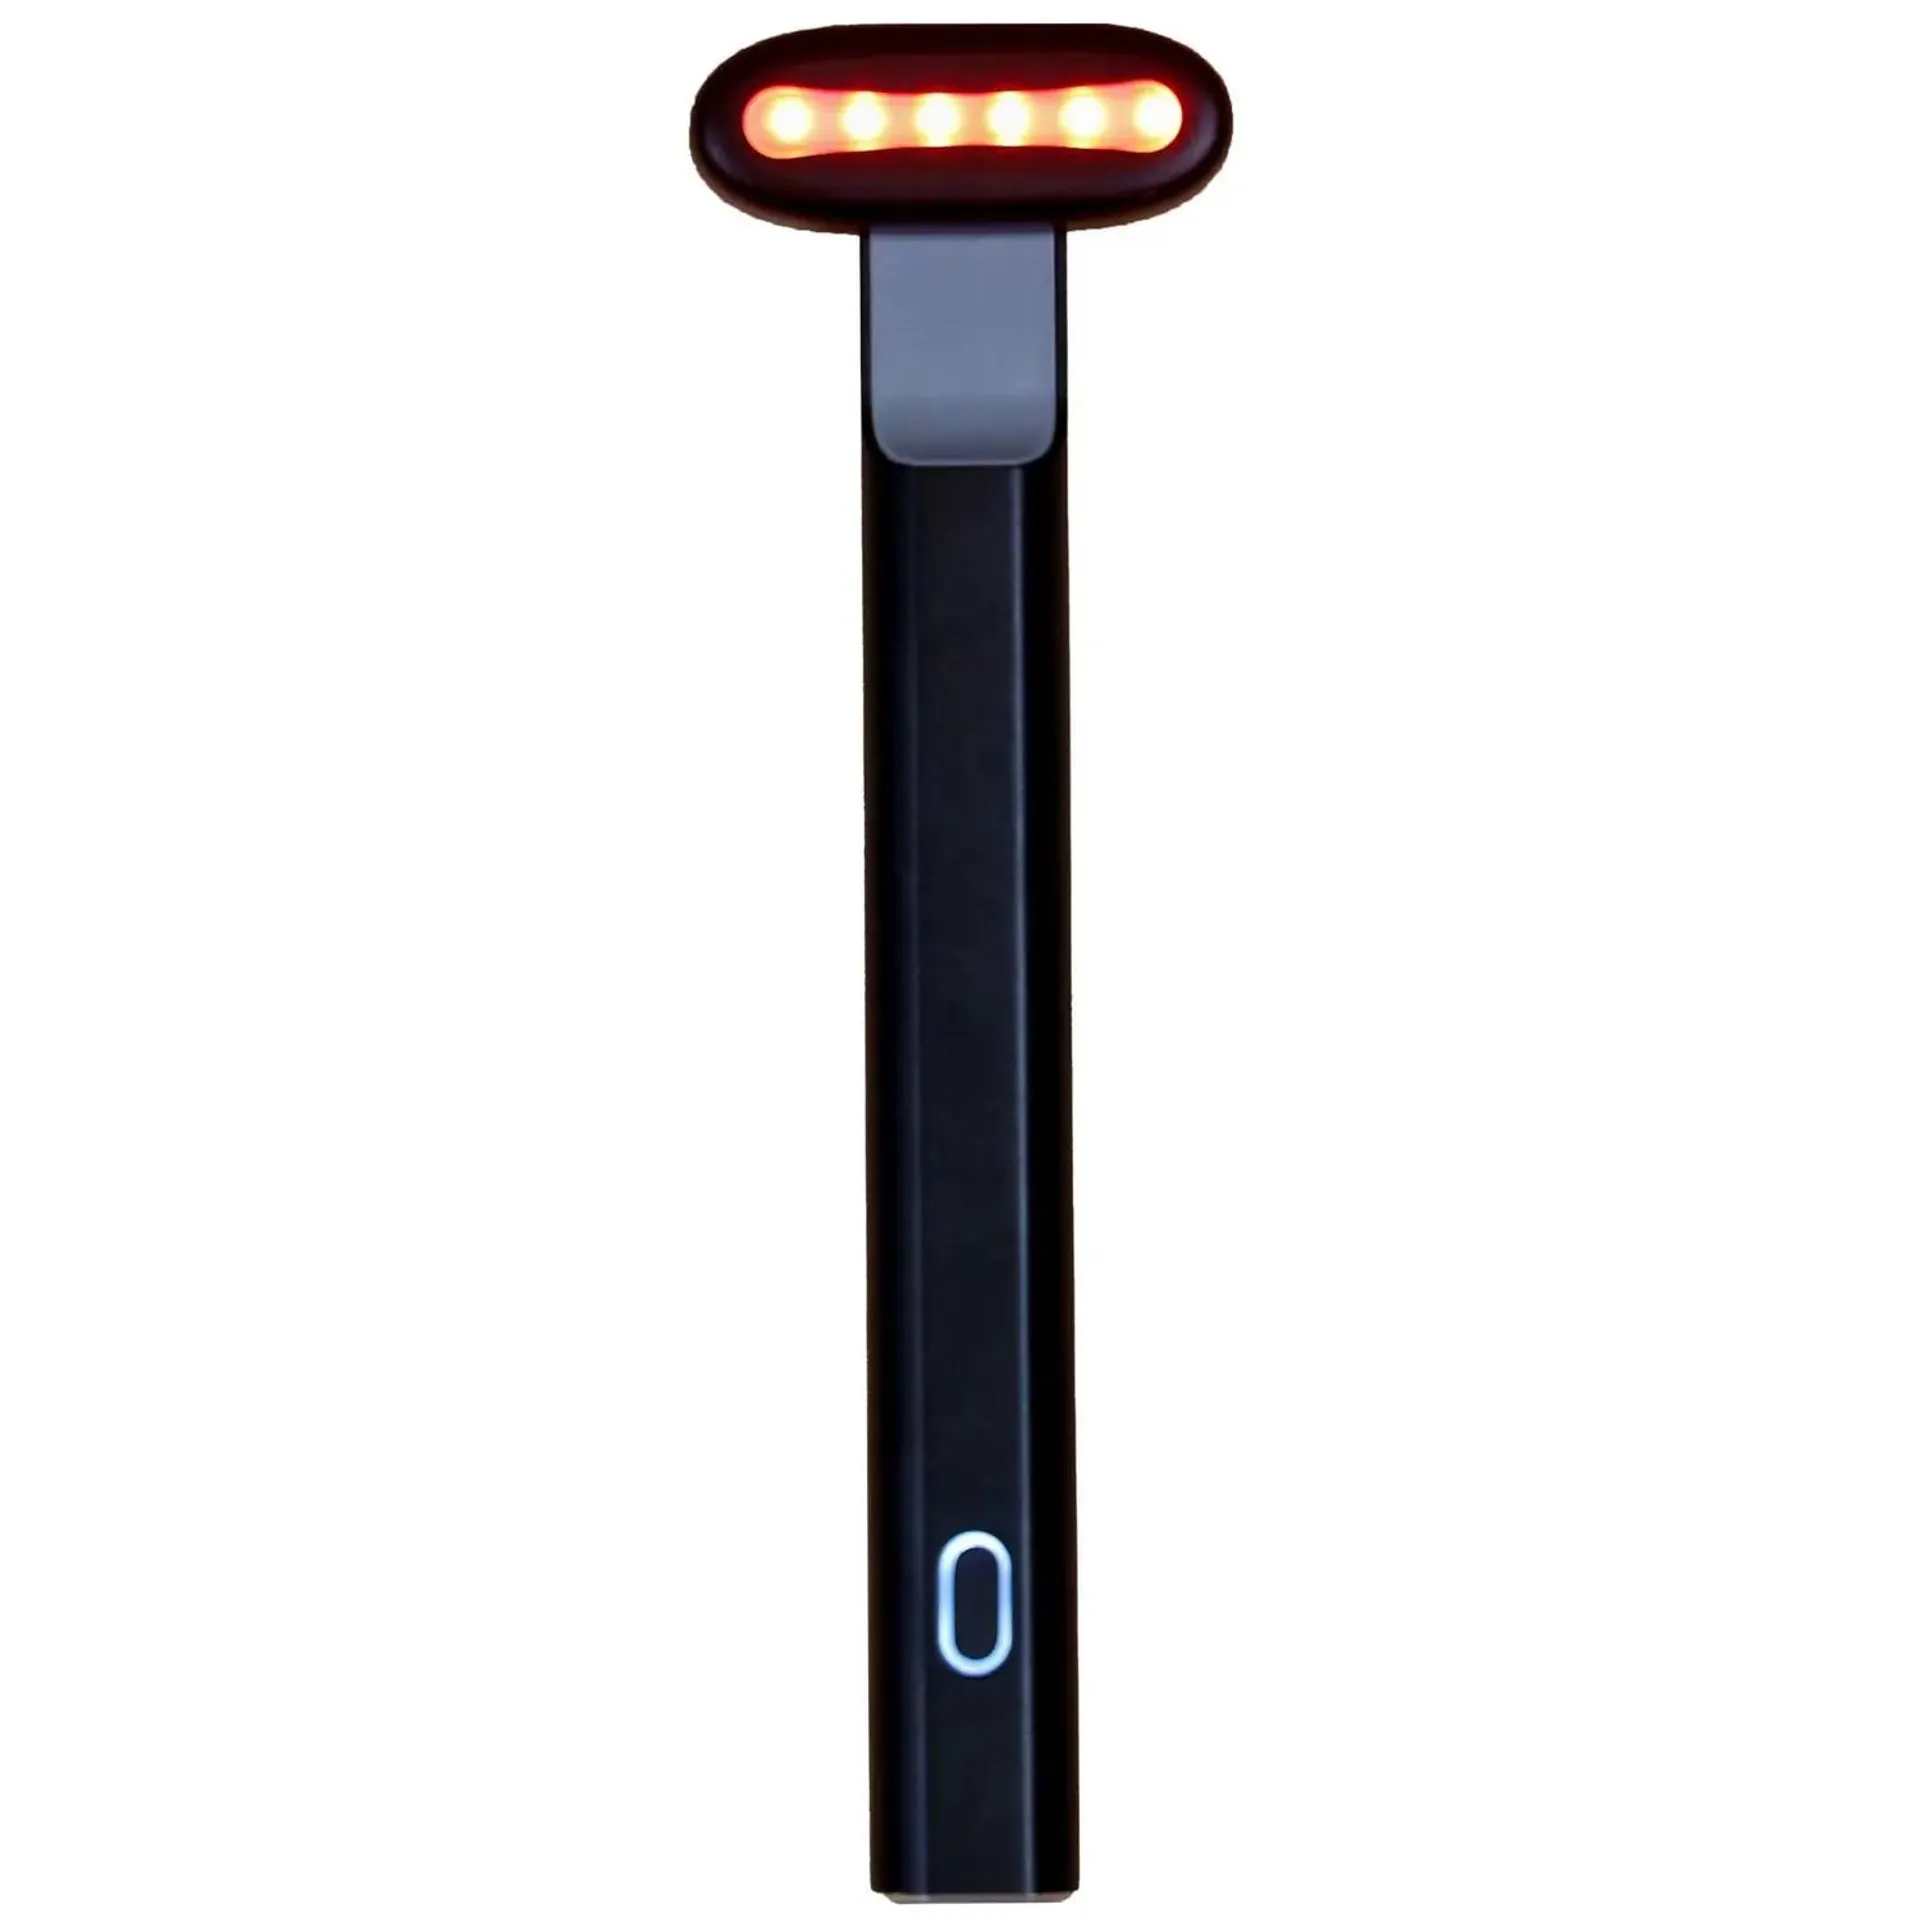 Lonvitalite Pro LED 5-1 Dual Red and Blue LED Light Therapy Facial Wand - Black